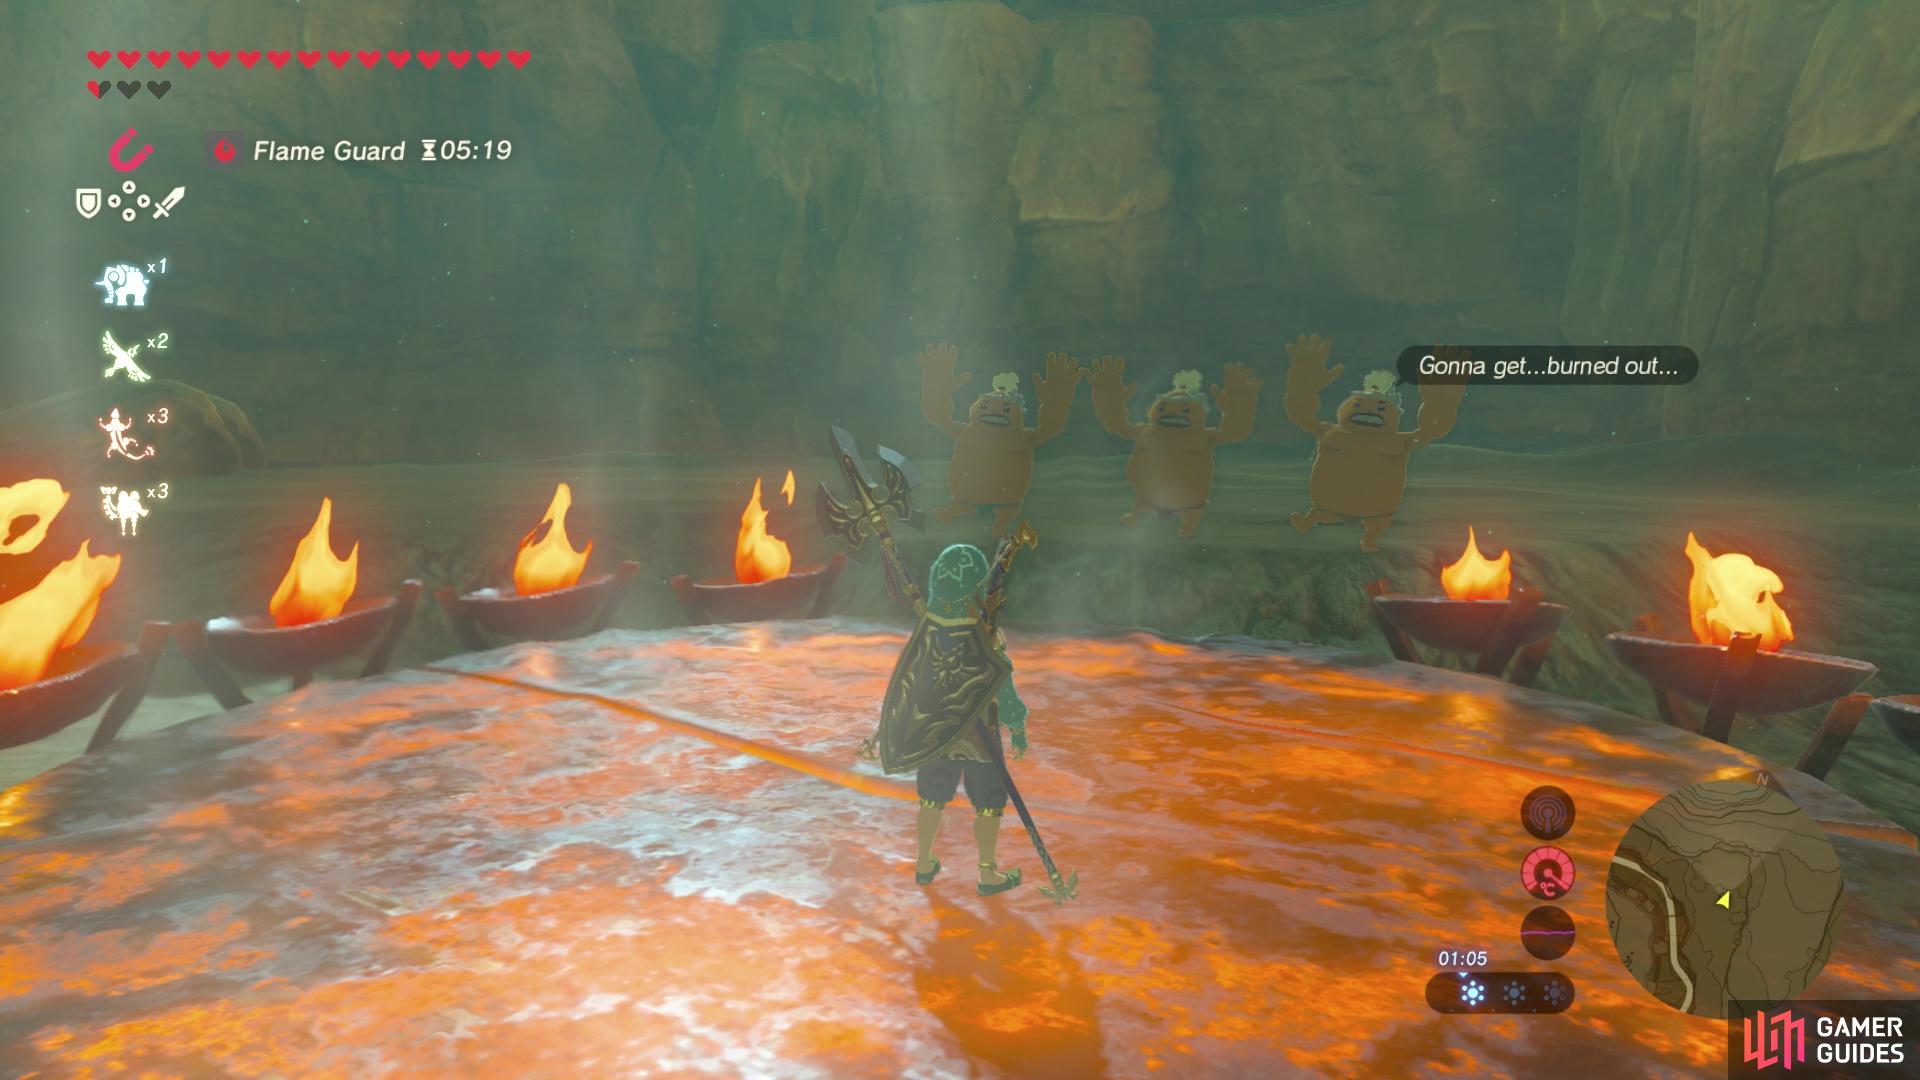 To access this shrine, you’ll need to complete the Shrine Quest, Test of Will. 